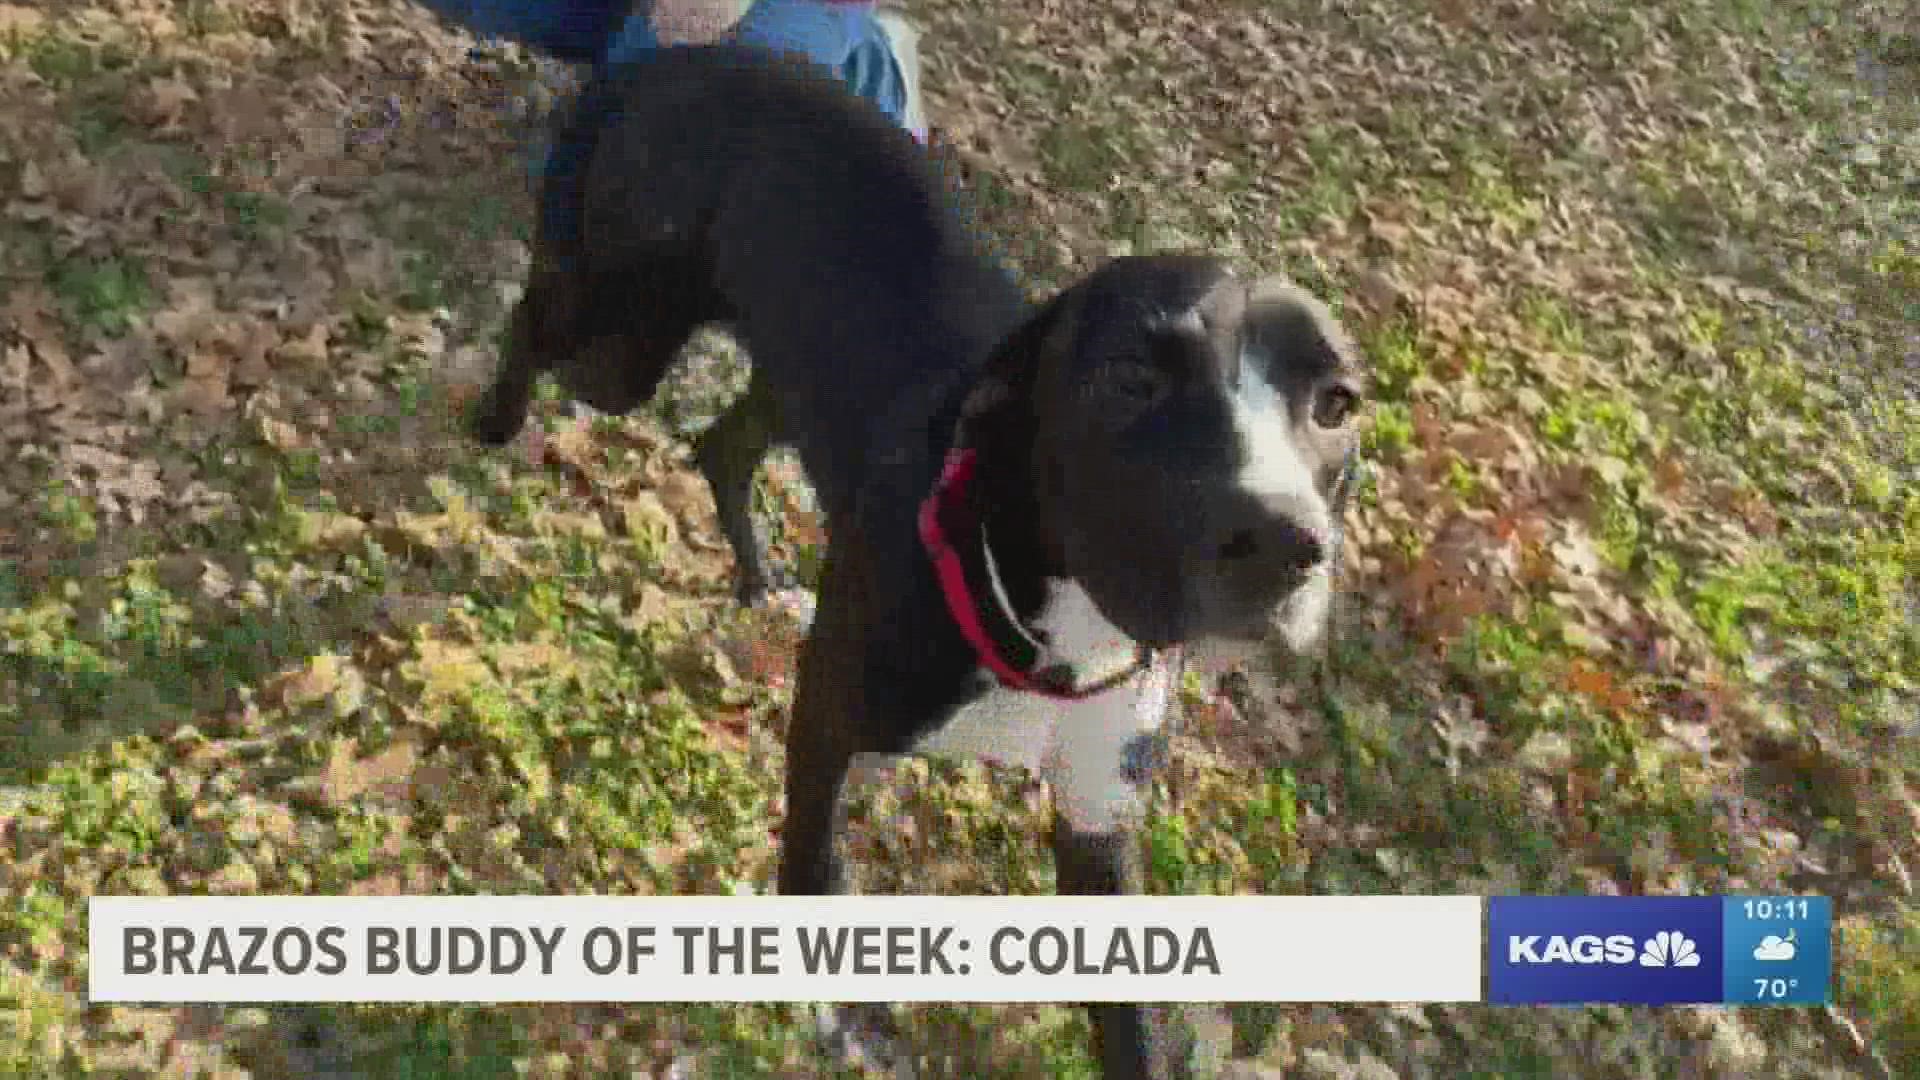 This week's featured Brazos Buddy is Colada, a one-year-old Lab mix that's looking for her forever home.